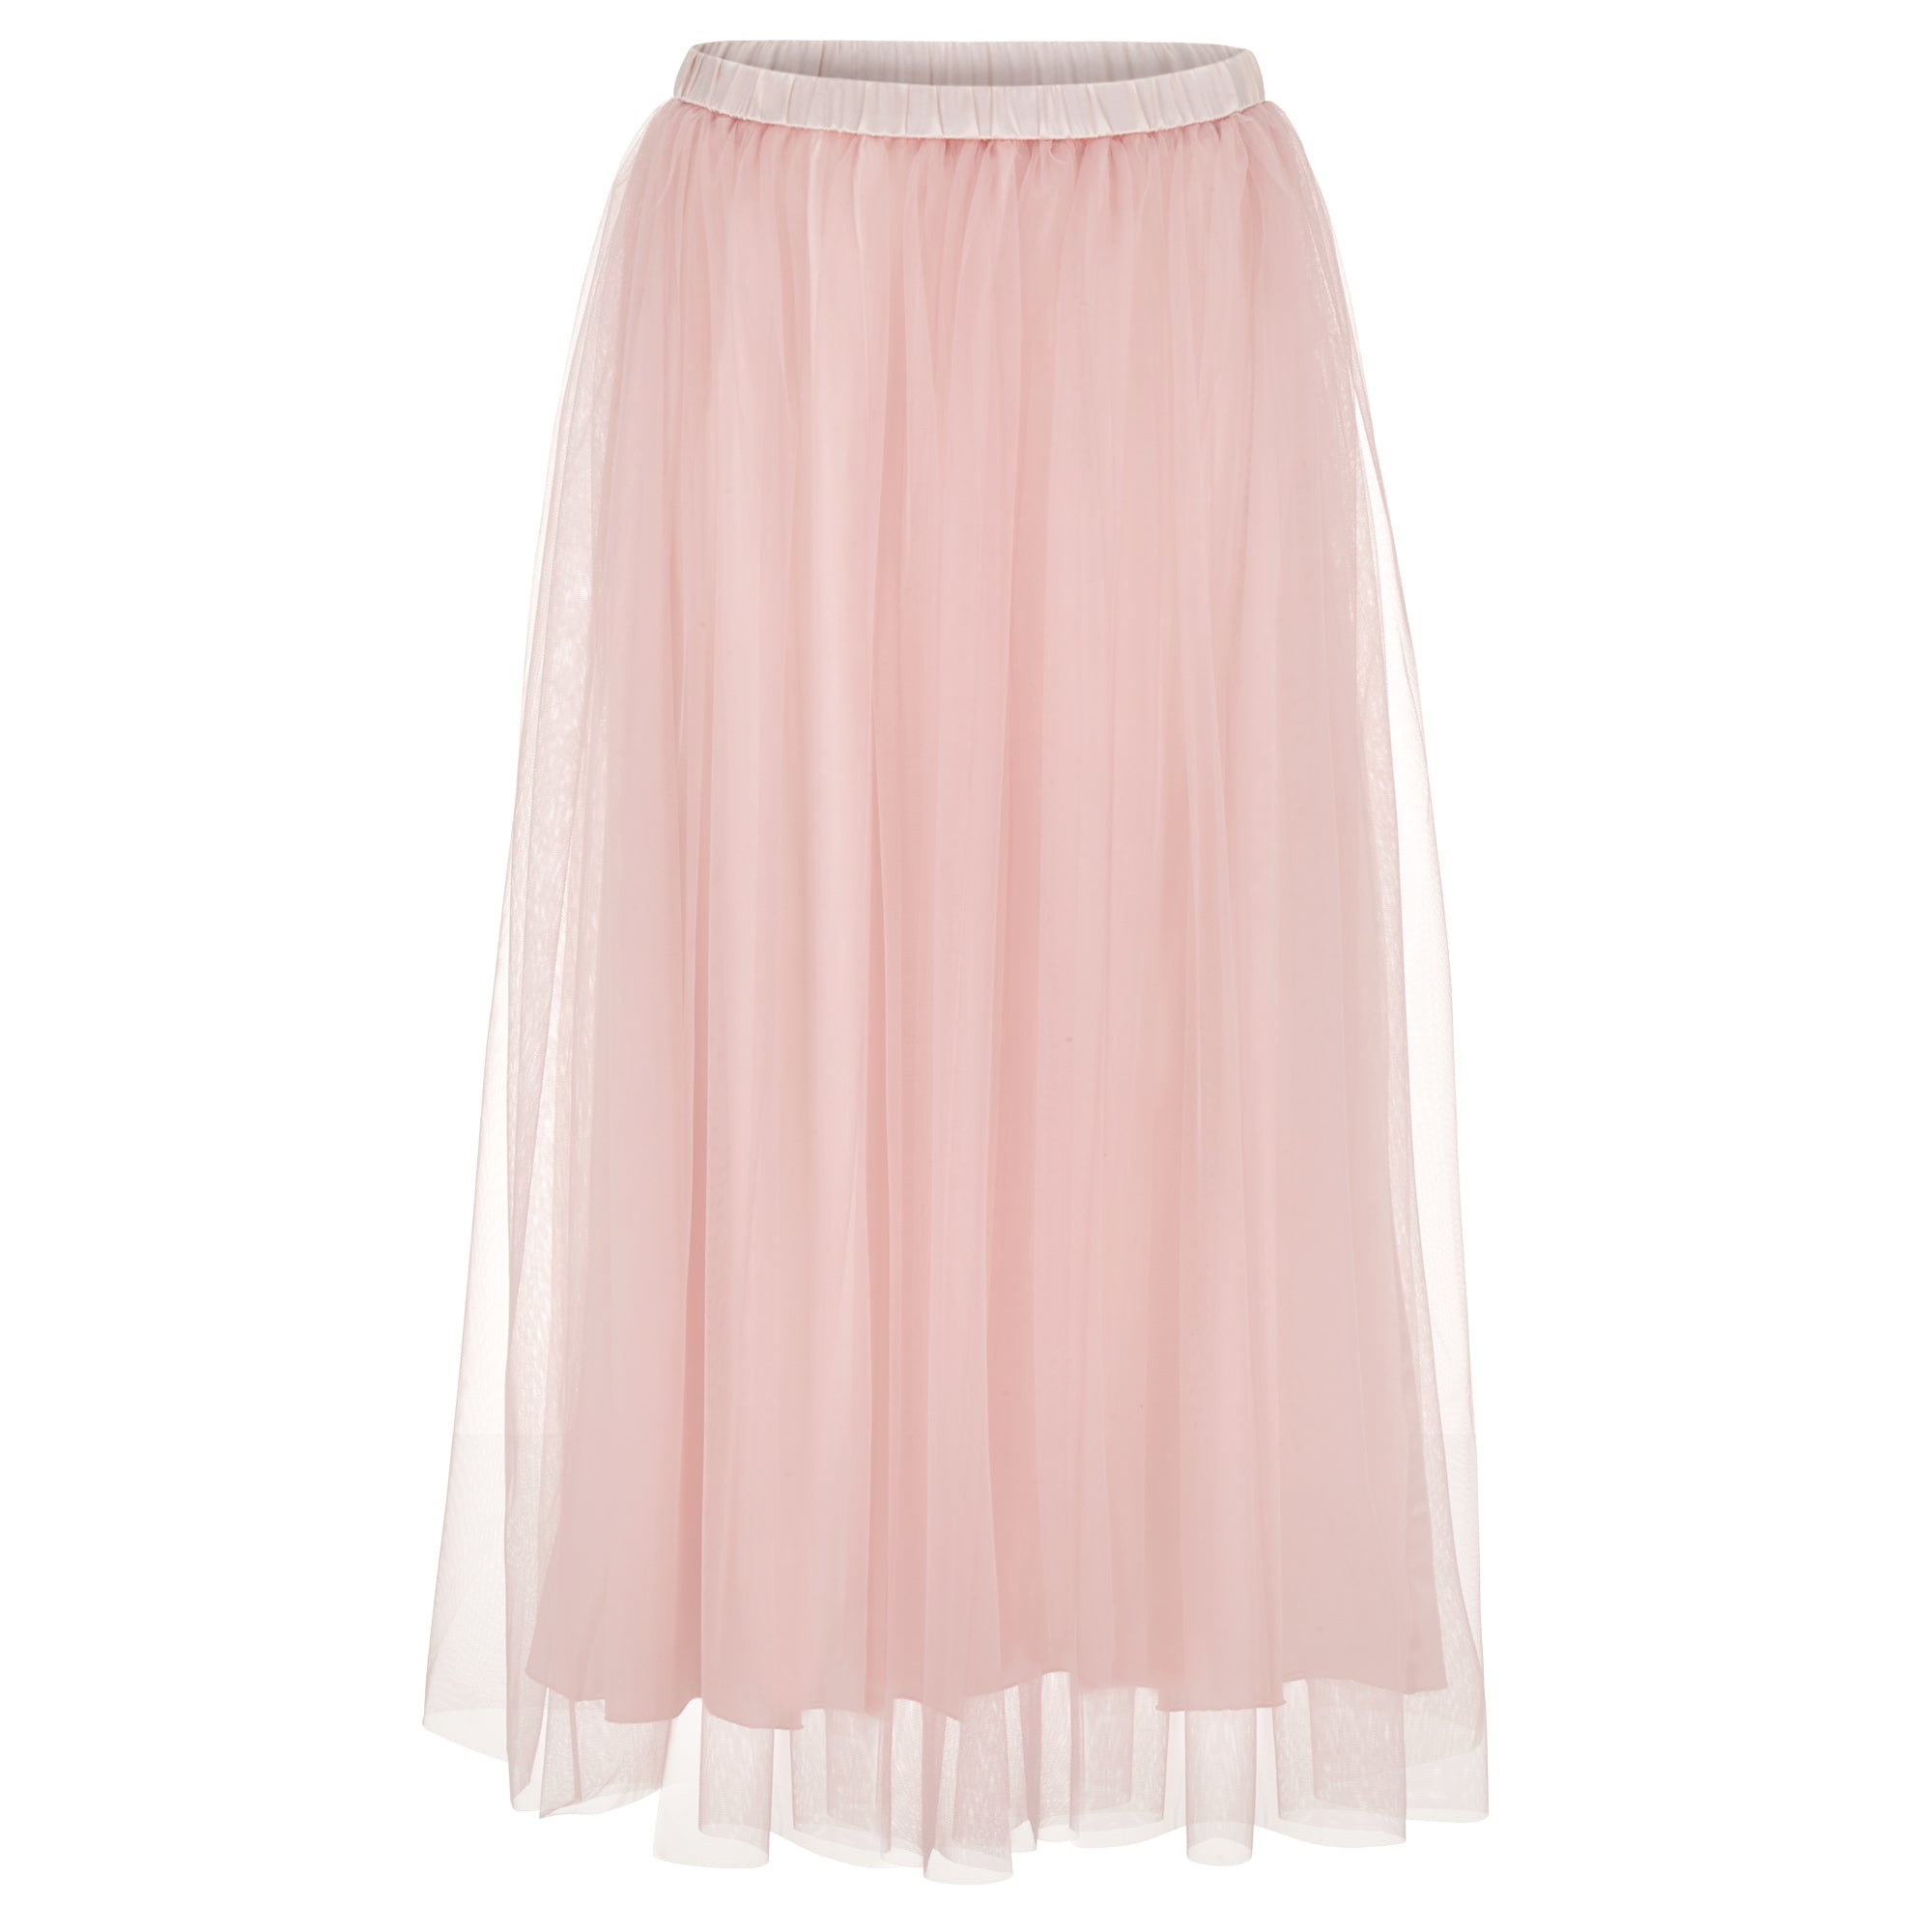 Toto skirt in pale pink – MIN FASHION